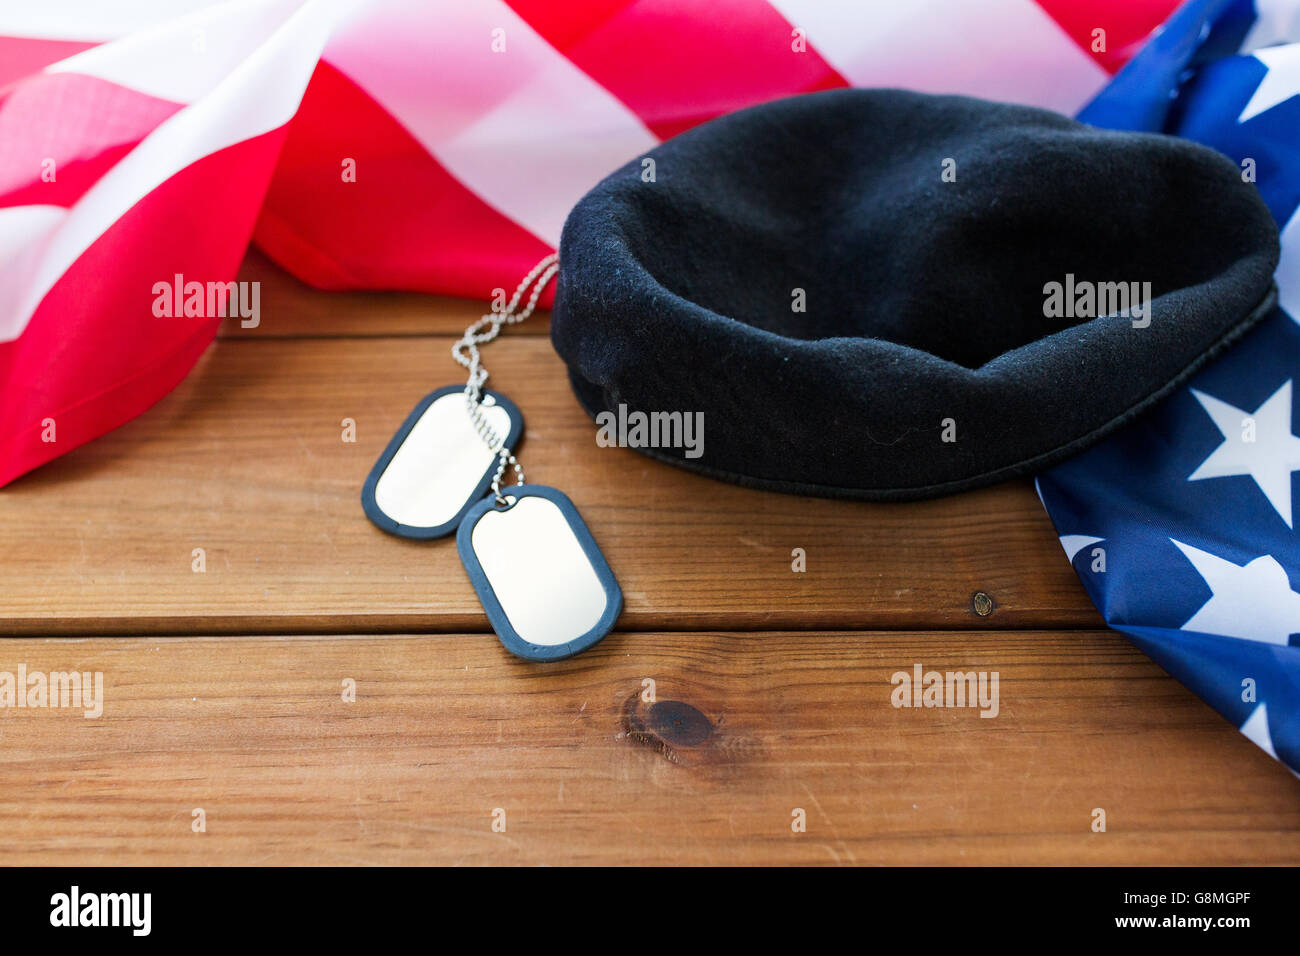 close up of american flag, hat and military badge Stock Photo